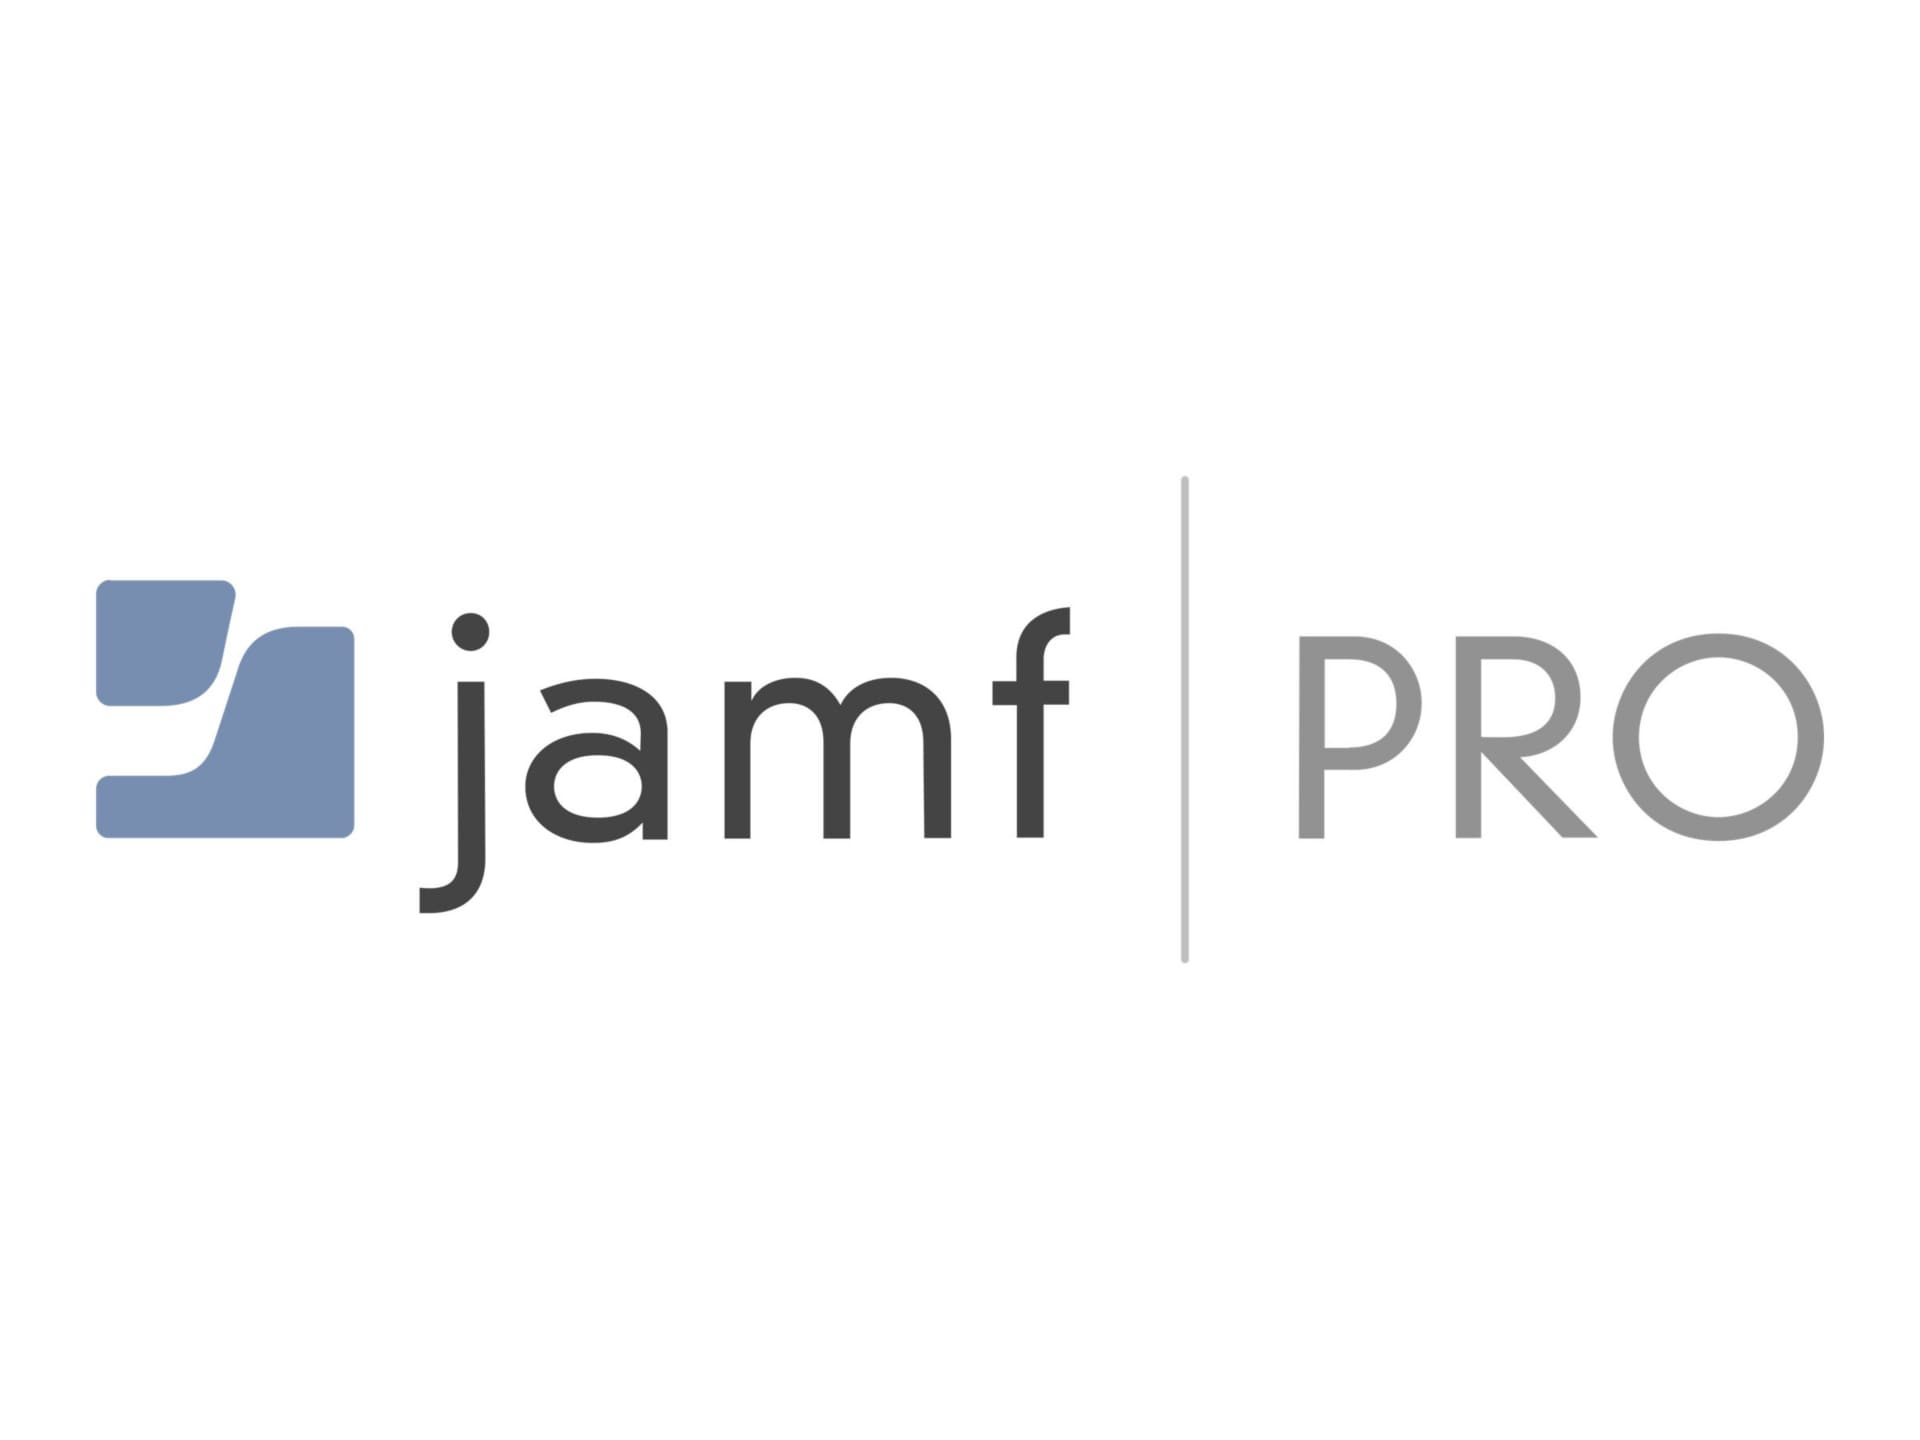 JAMF PRO - subscription license renewal (annual) - 1 device